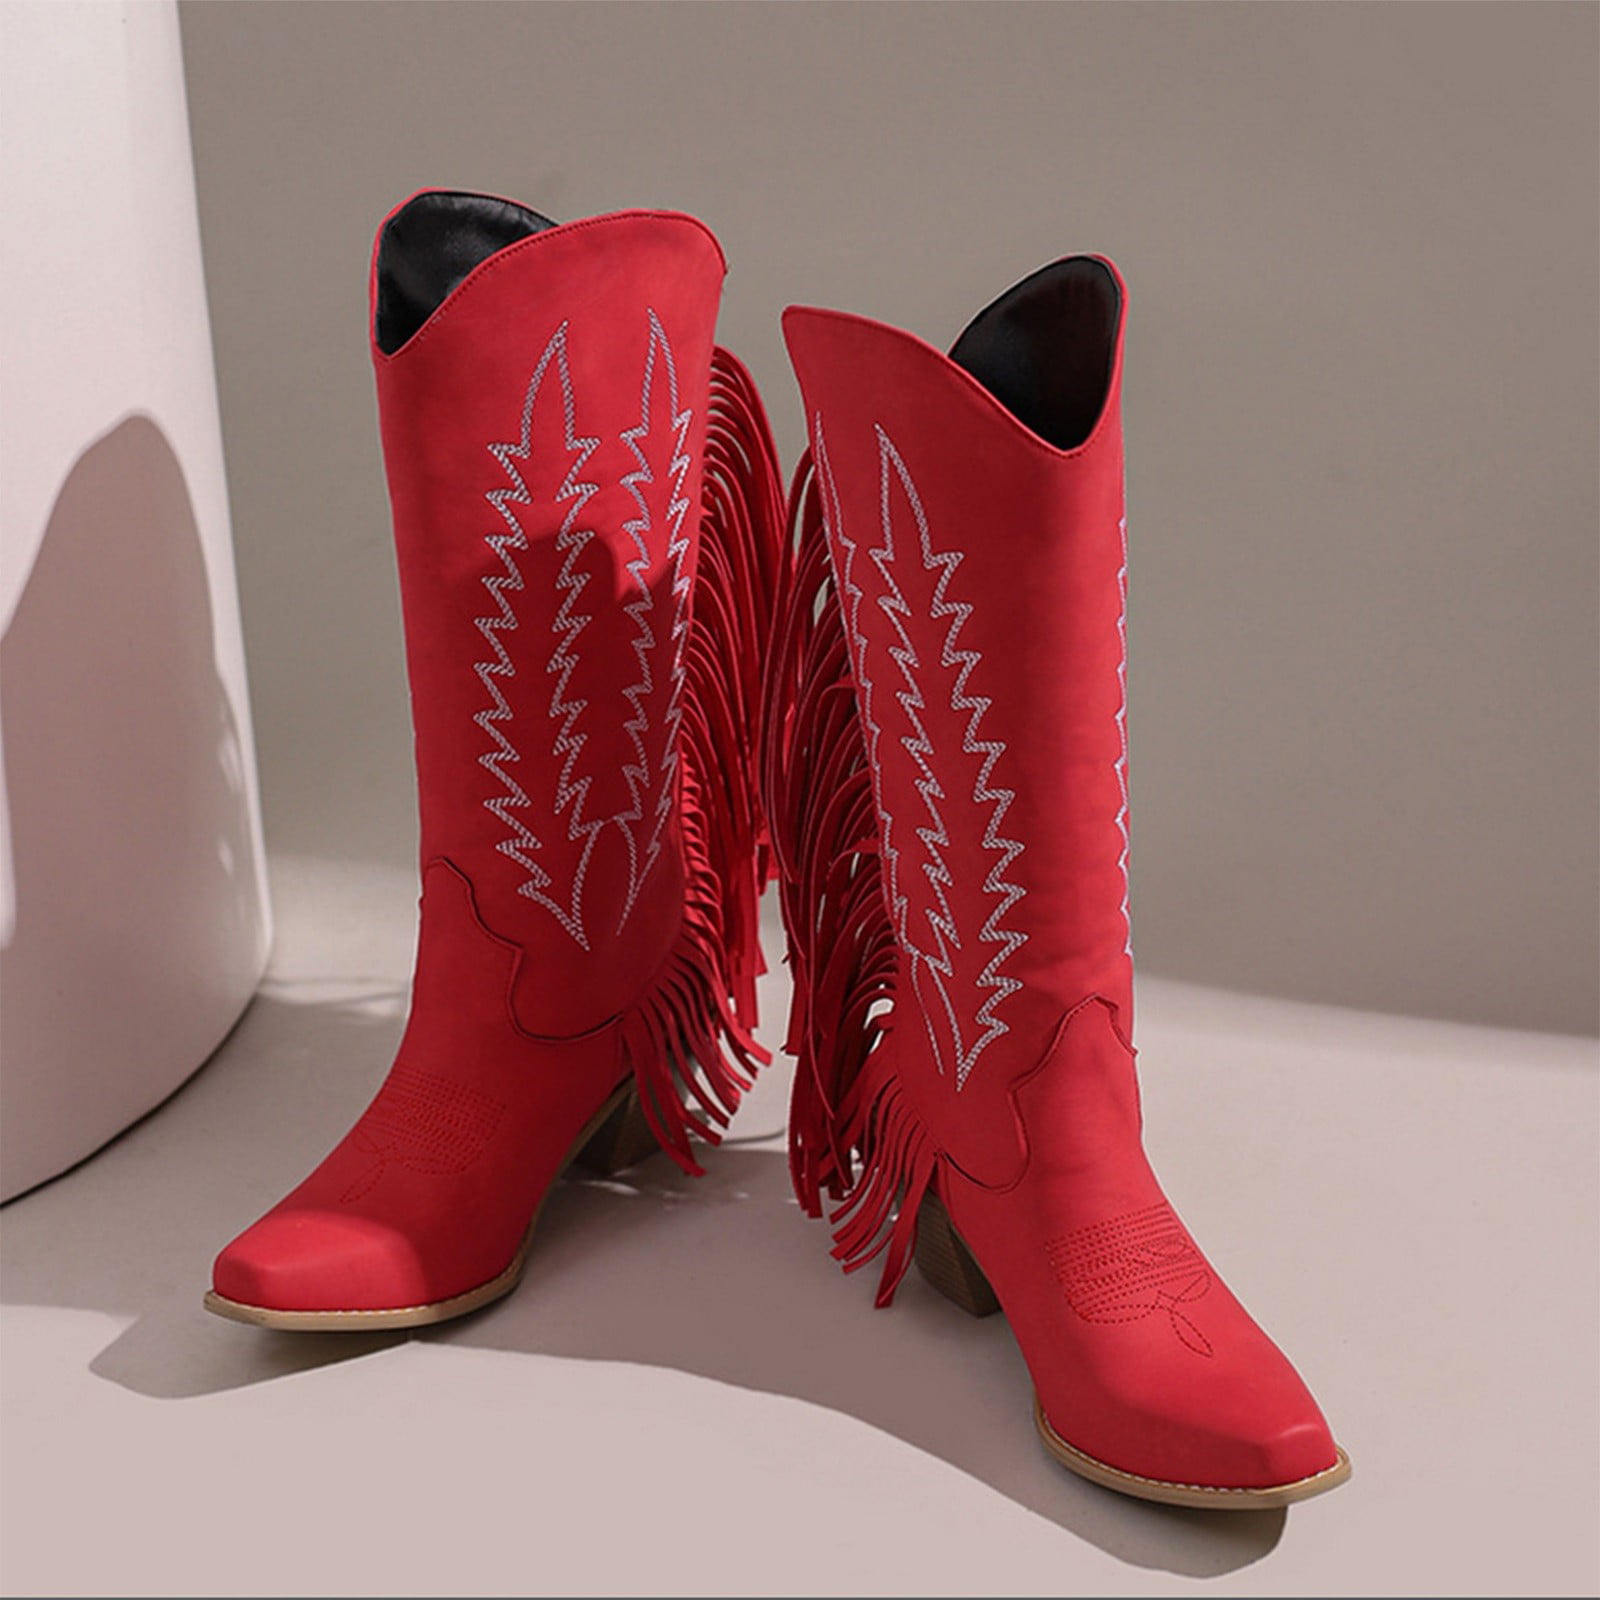 Fall Favorites Re-imagined  Womens cowgirl boots, Red cowboy boots, Red  cowgirl boots